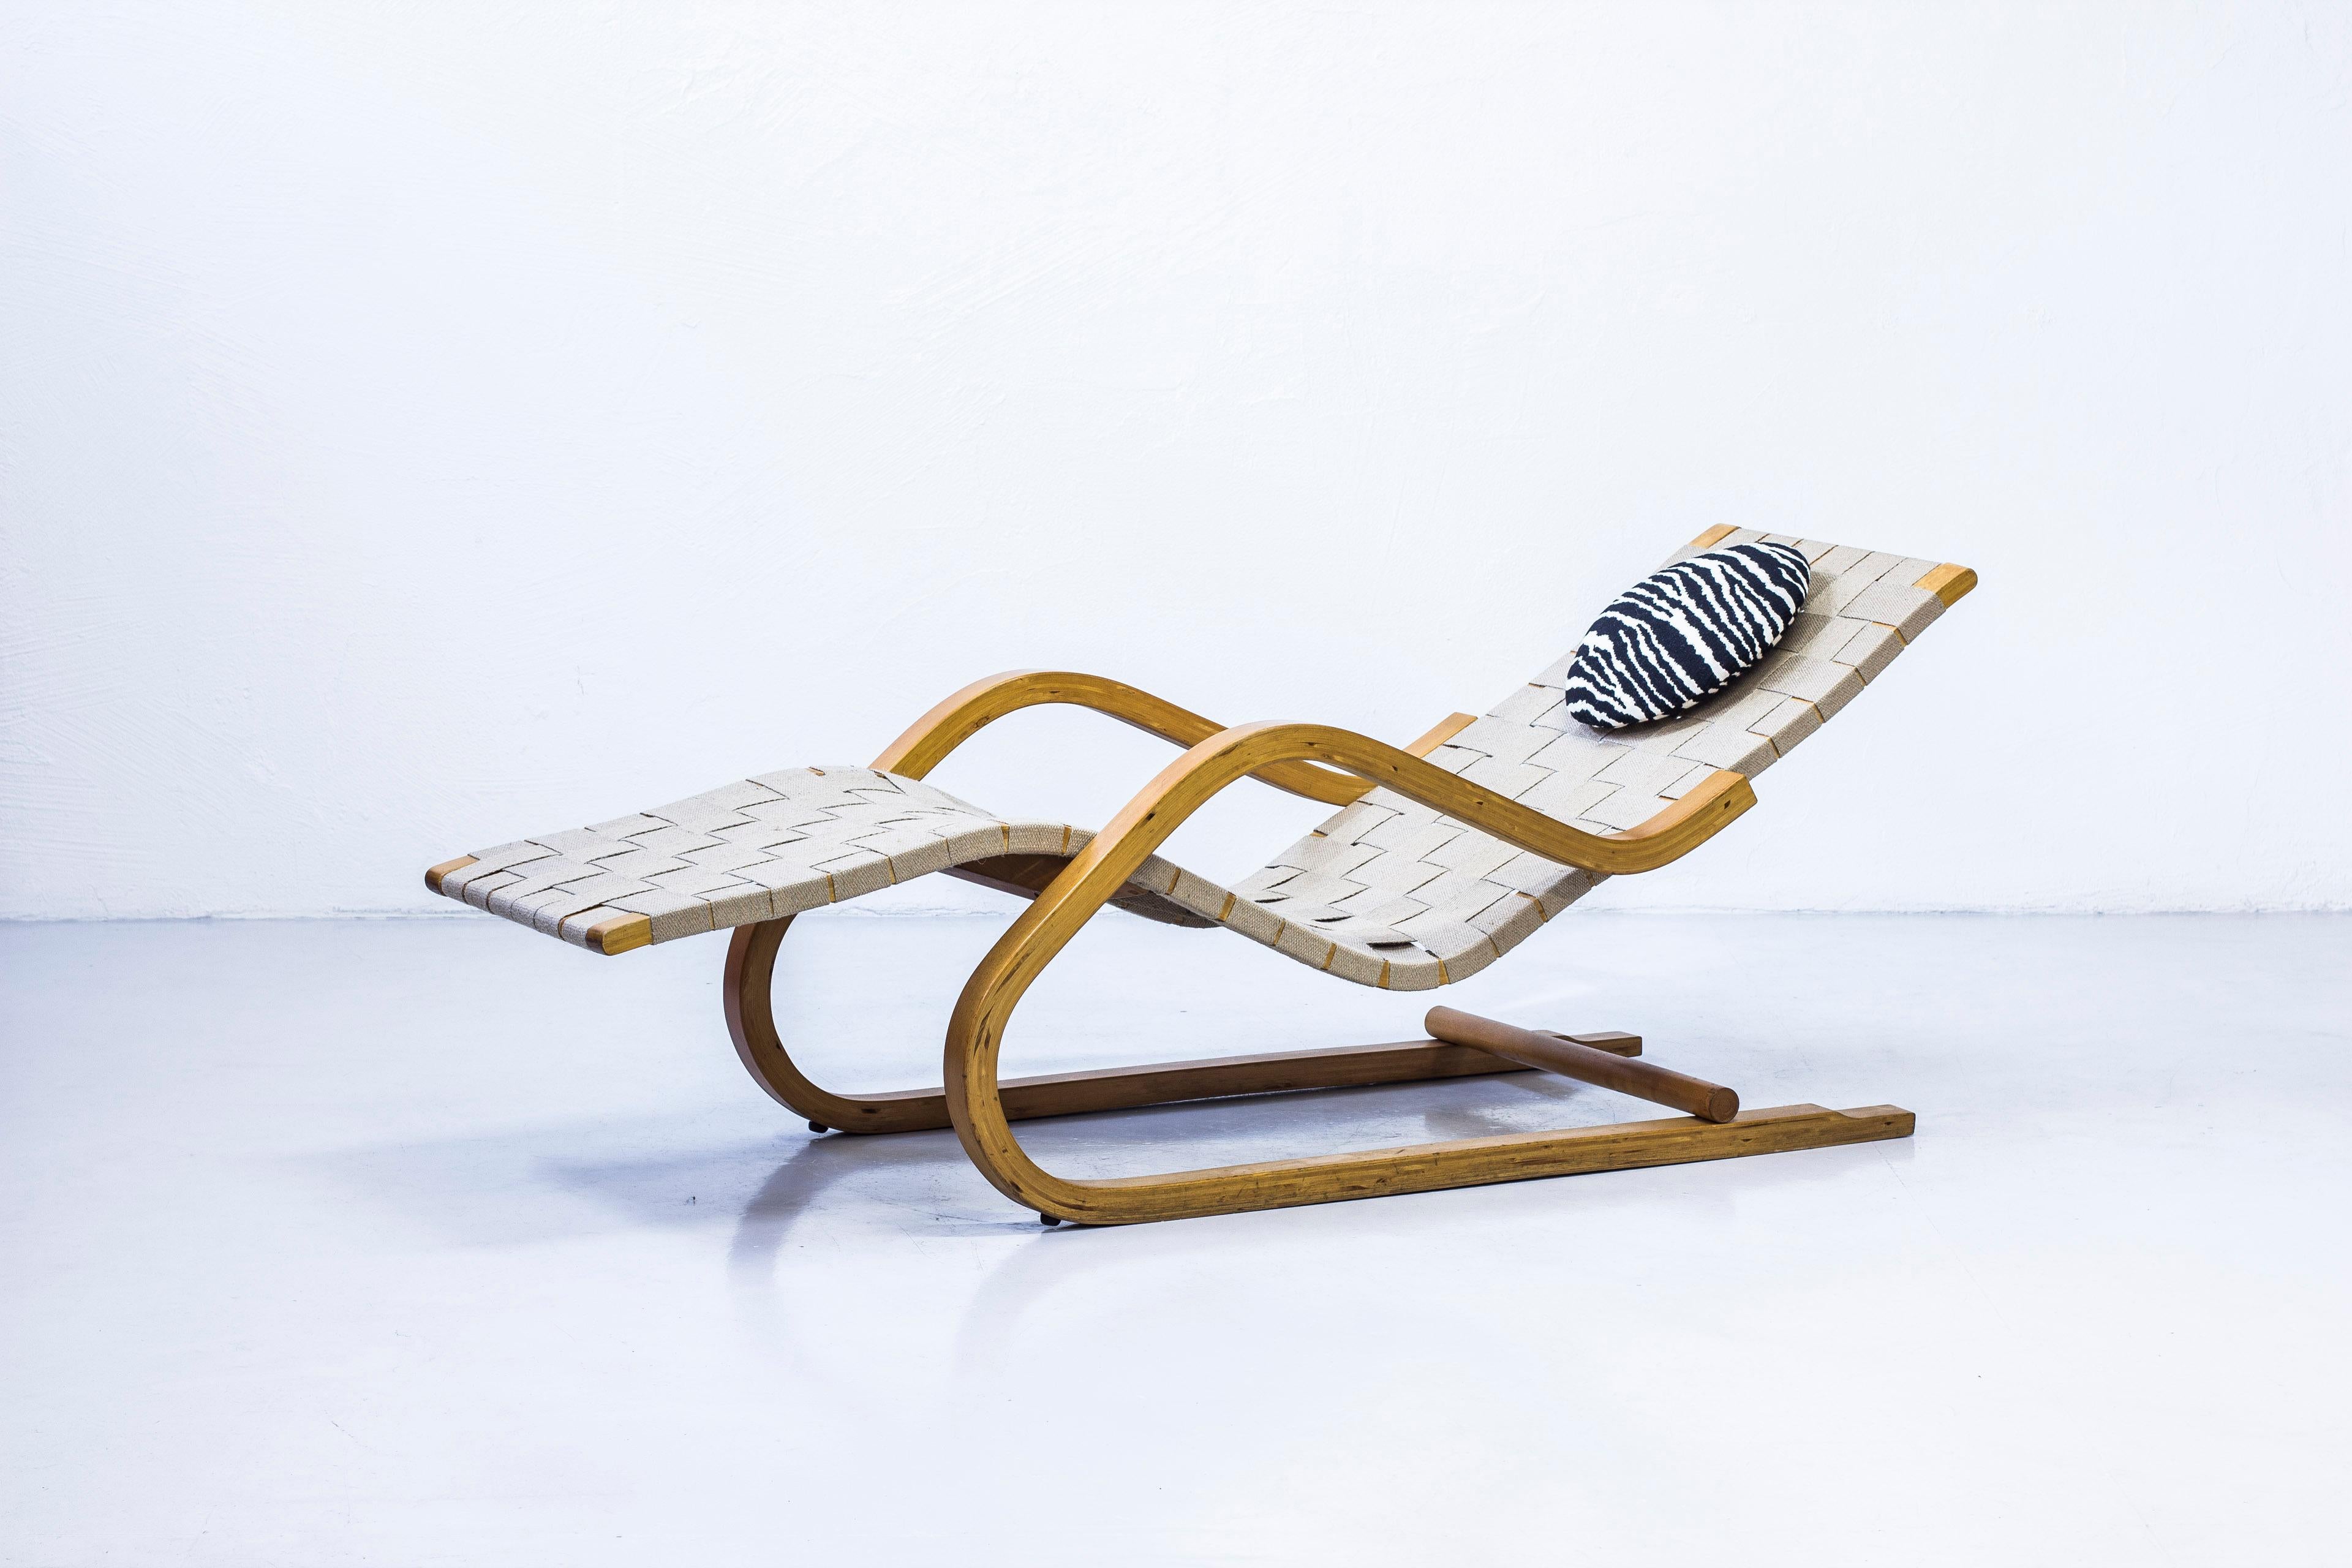 Rare chaise lounge model 39 designed by Alvar Aalto. This example made by the Artek factory in Hedemora in Sweden between 1945-1956. Made from lacquered birch wood with jute webbing. With a round neck cushion in Arteks classic wool zebra fabric.